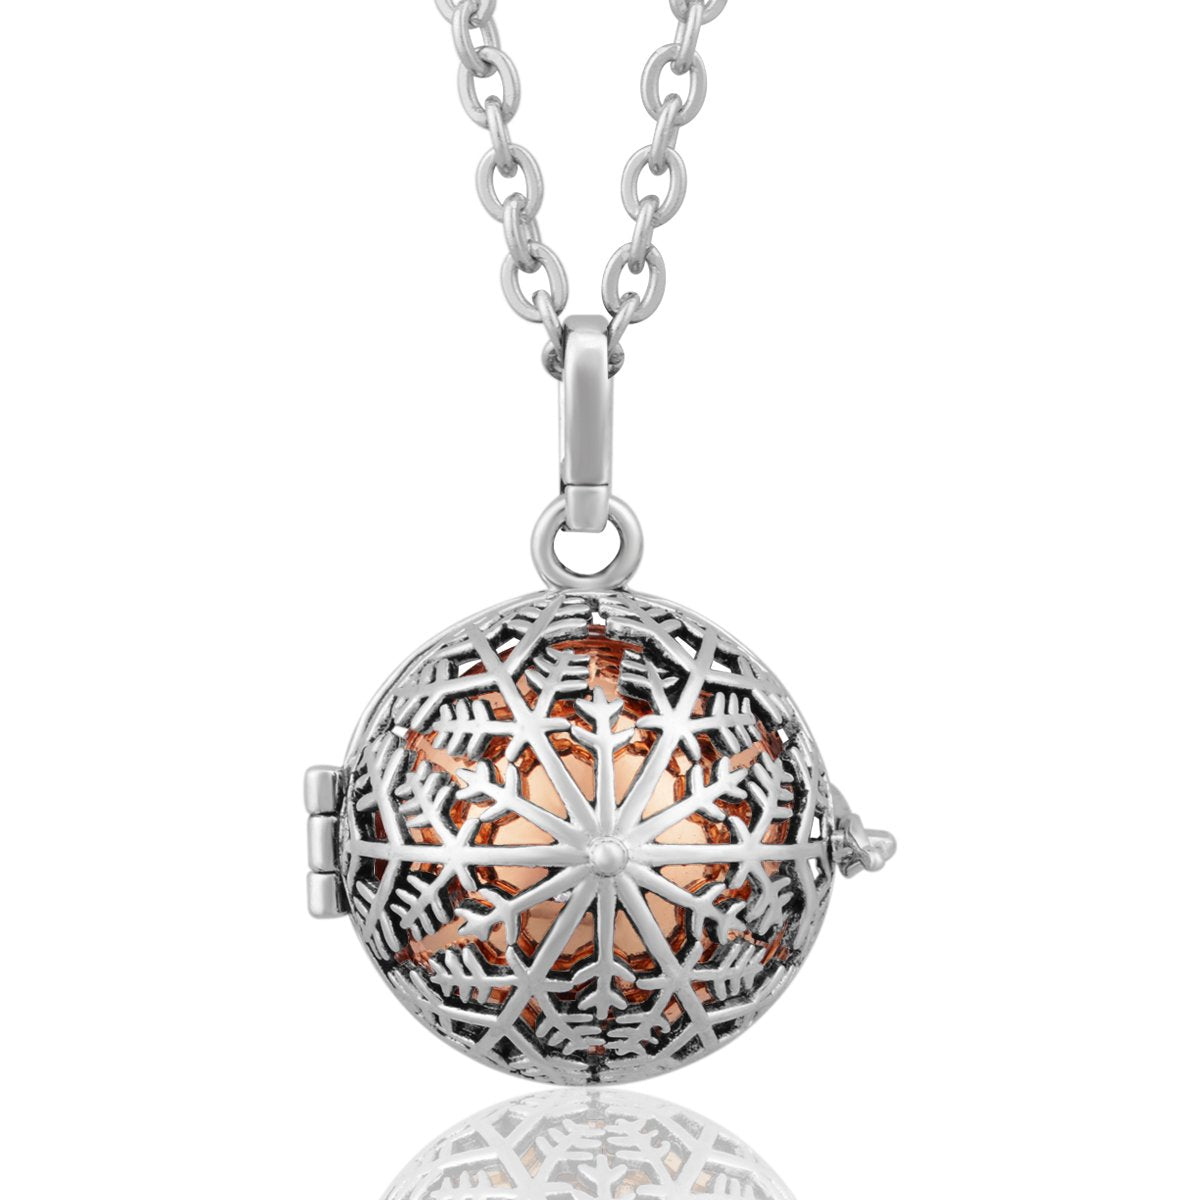 Pure And Beautiful Snowflake Music Bell Ball And Harmonic Bola Necklace 30 Inches